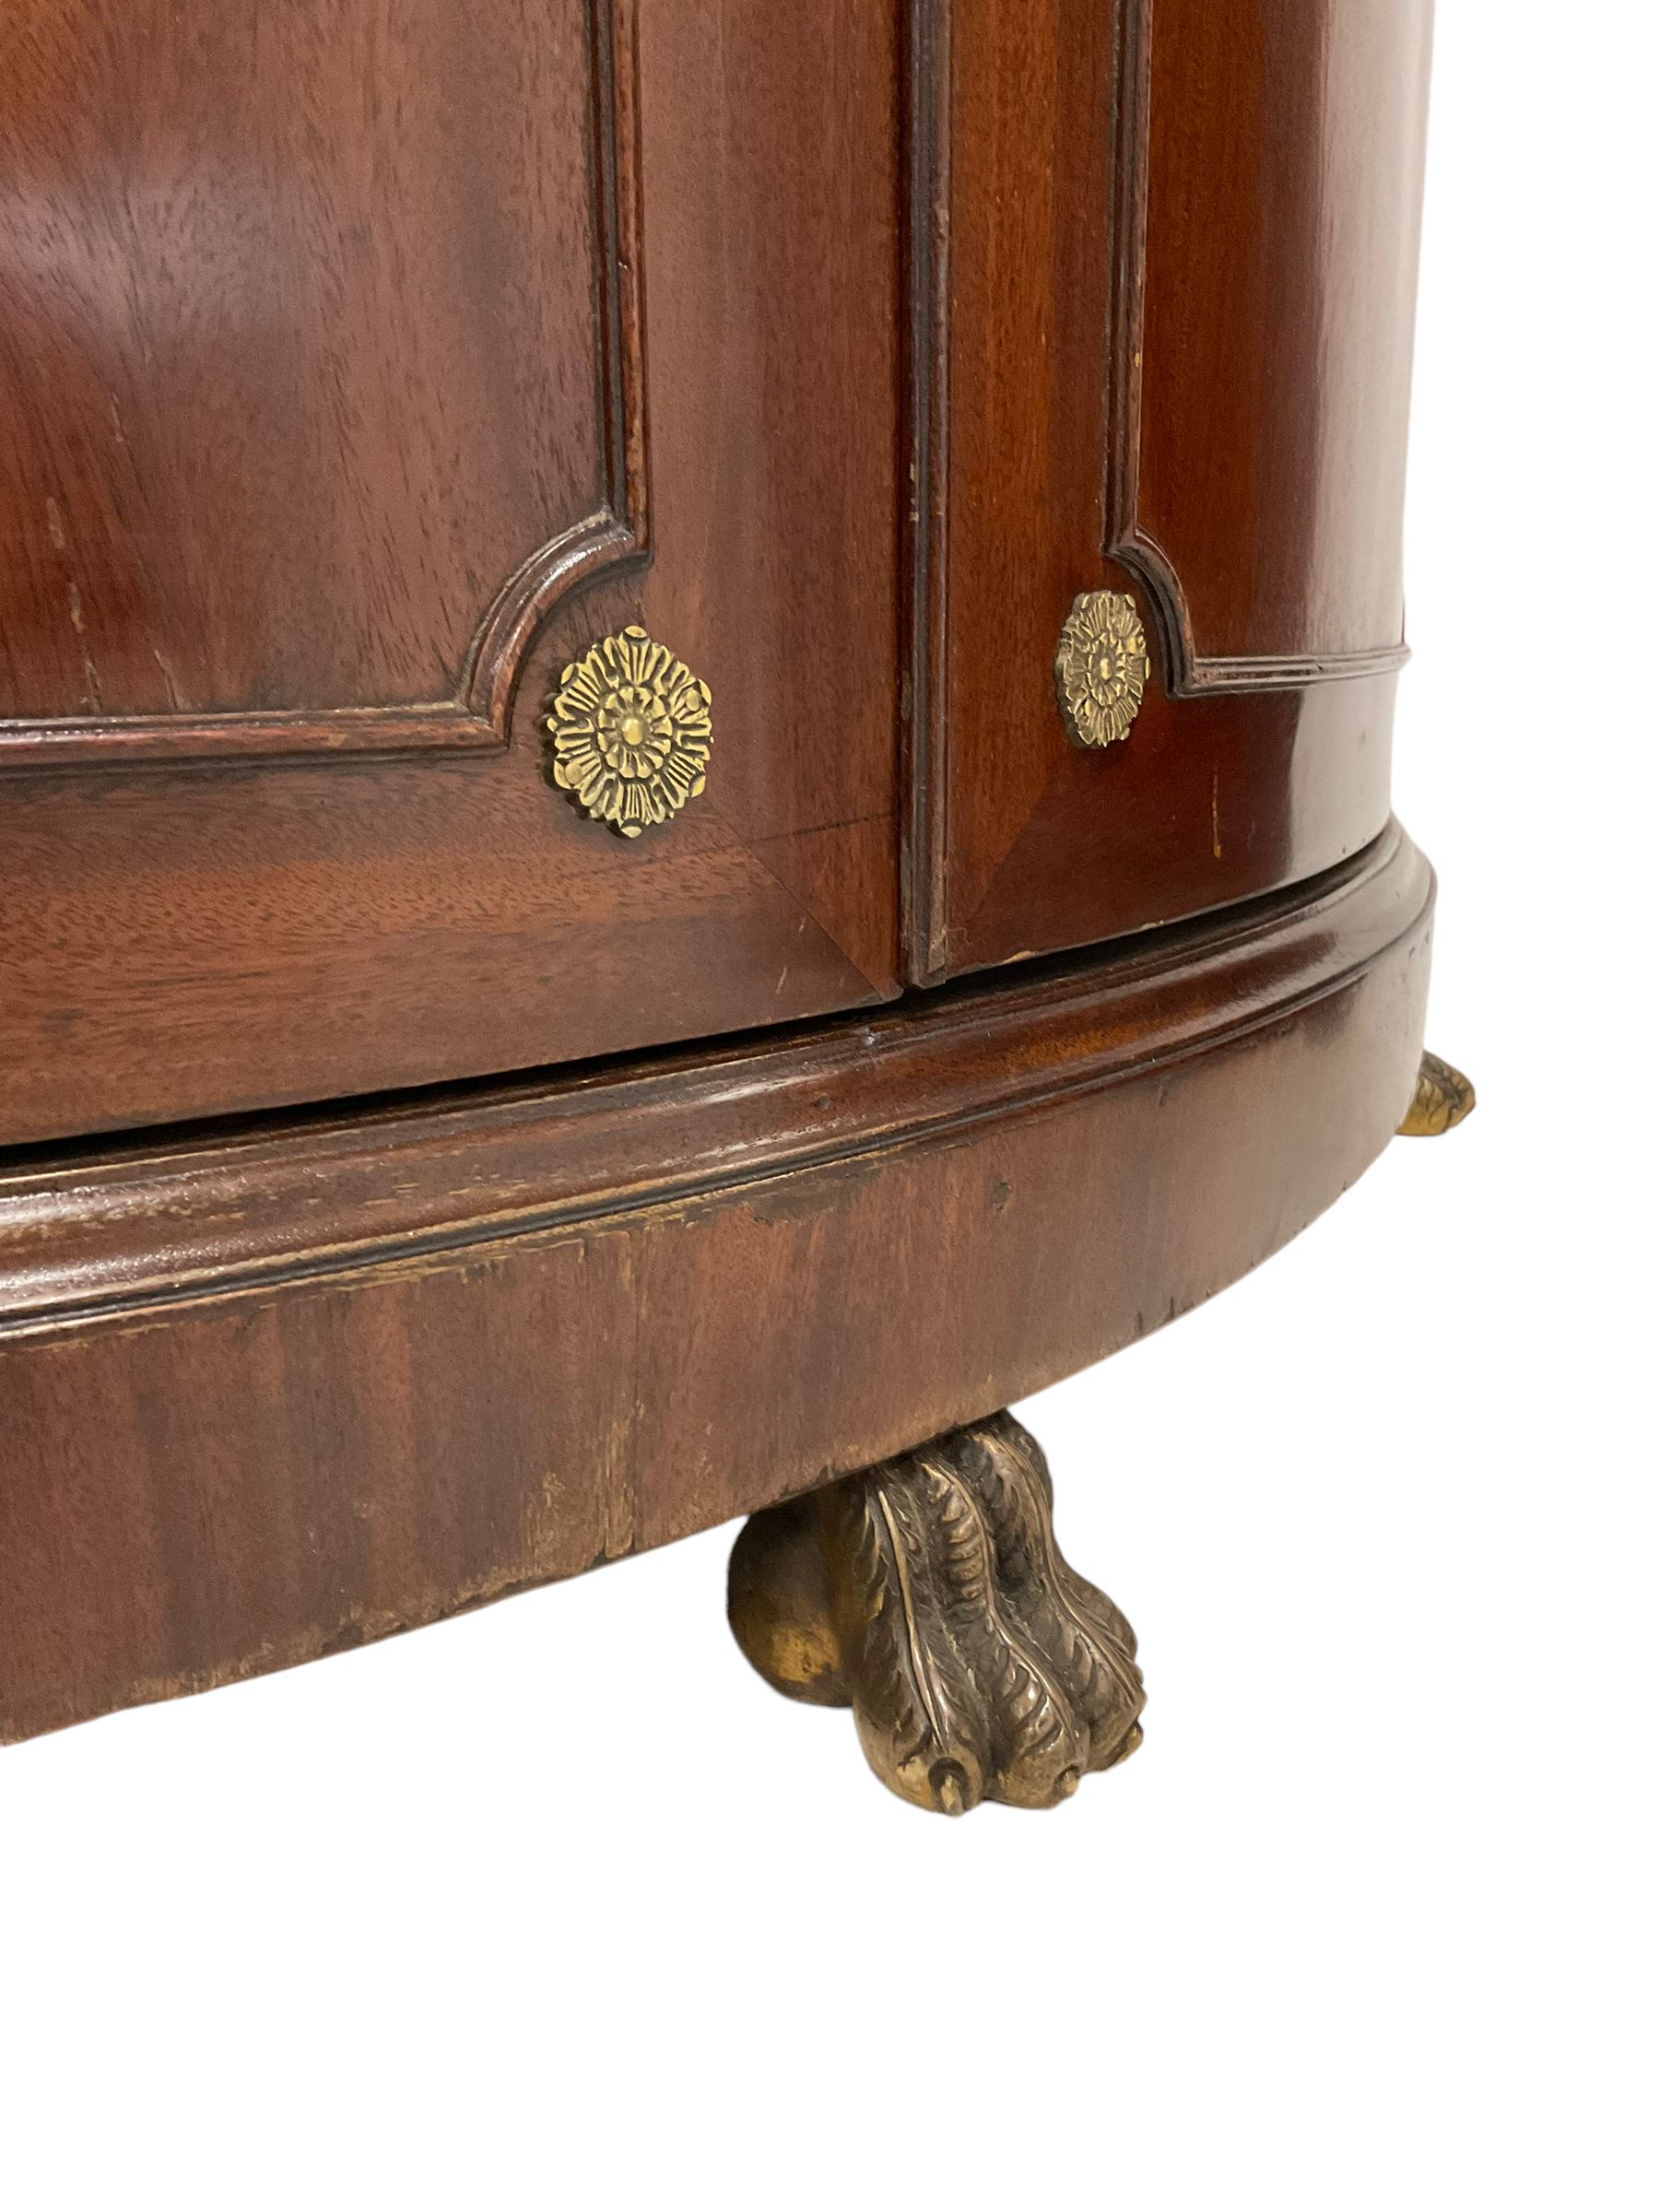 Pair of French Empire design corner cabinets - Image 2 of 10